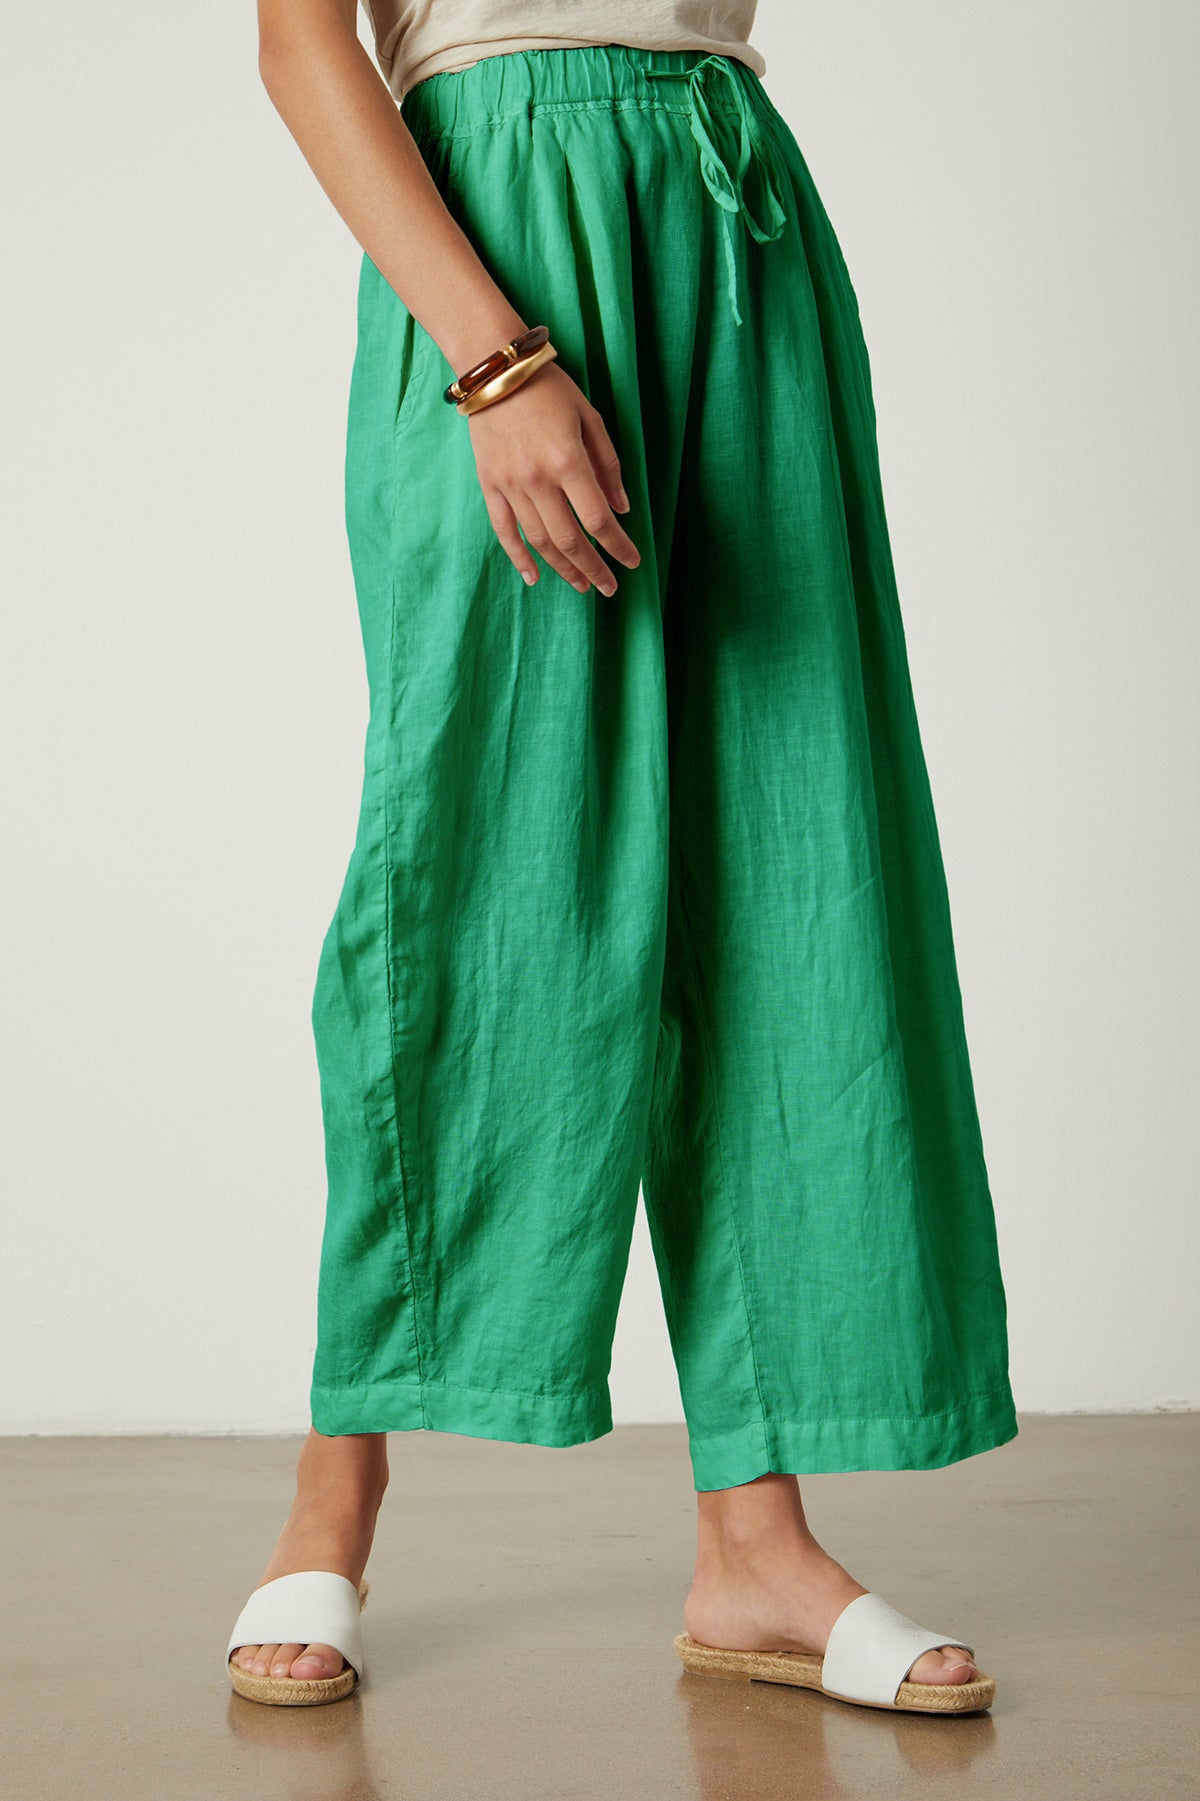   Hannah Linen Pant in jade green front & side 